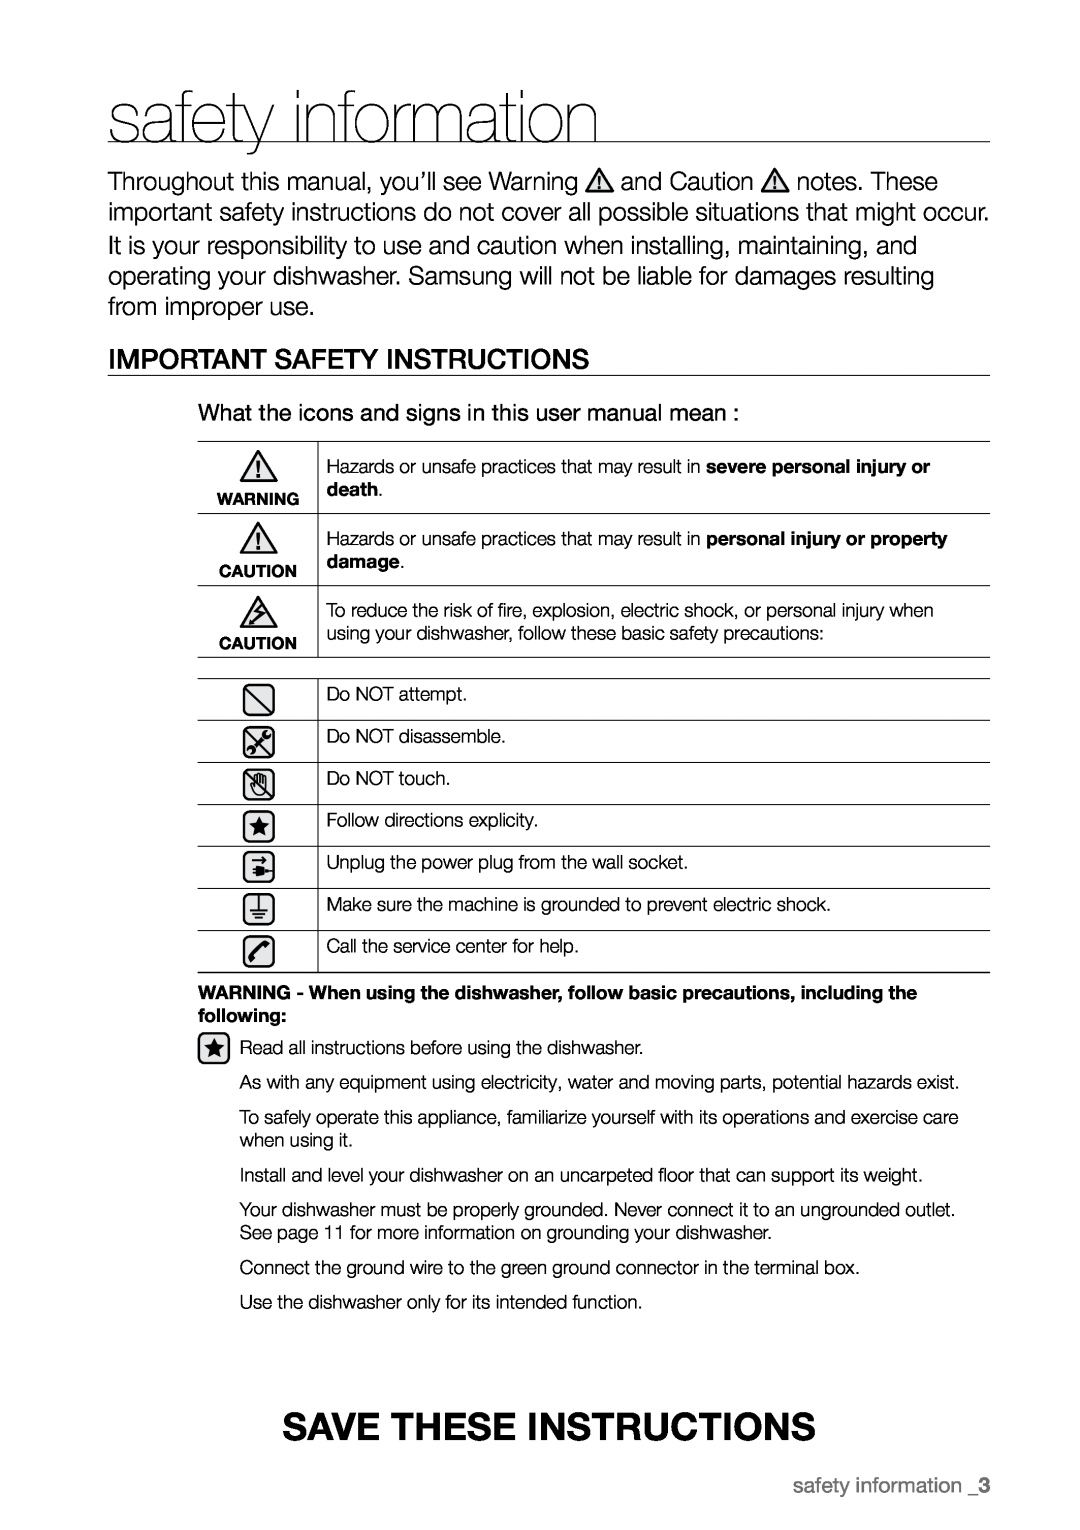 Samsung DMR78 manual safety information, Save these instructions, Important safety instructions 